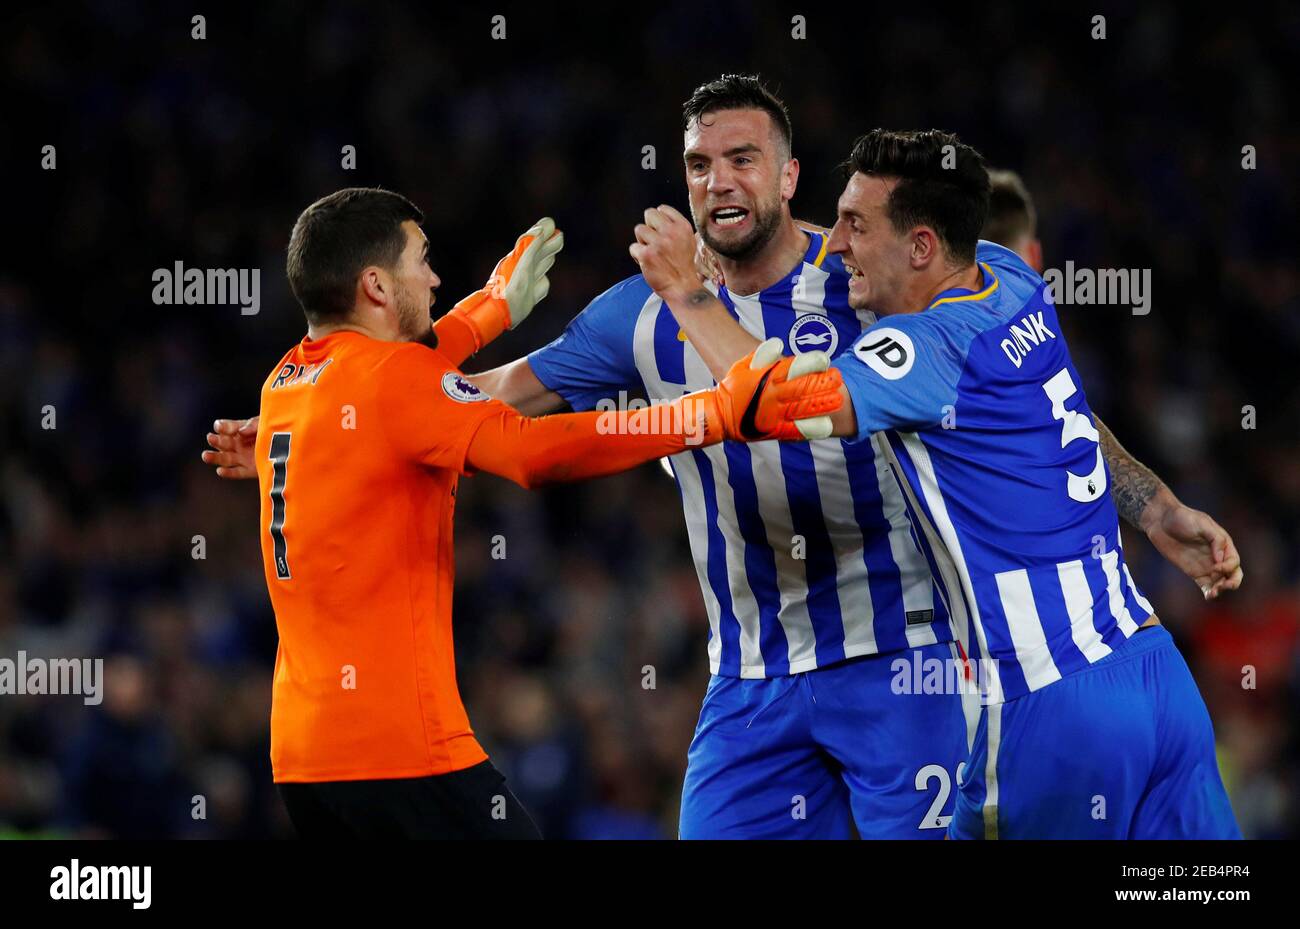 Soccer Football - Premier League - Brighton & Hove Albion v Manchester United - The American Express Community Stadium, Brighton, Britain - May 4, 2018   Brighton's Shane Duffy celebrates after the match with Lewis Dunk and Mathew Ryan   REUTERS/Eddie Keogh    EDITORIAL USE ONLY. No use with unauthorized audio, video, data, fixture lists, club/league logos or "live" services. Online in-match use limited to 75 images, no video emulation. No use in betting, games or single club/league/player publications.  Please contact your account representative for further details. Stock Photo